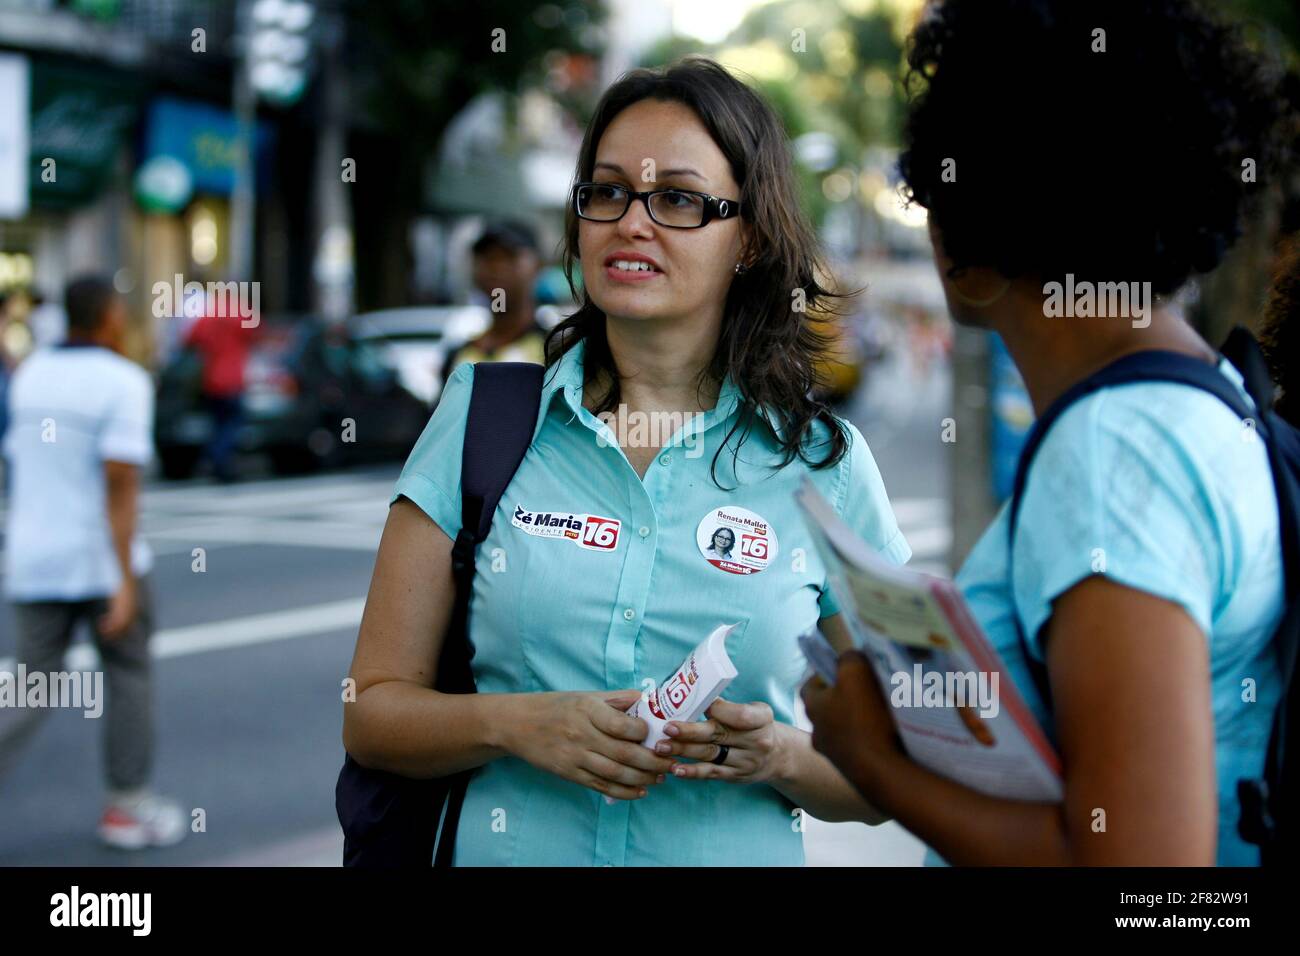 salvador, bahia / brazil - august 6, 2014: Renata Mallet, member of the political party PSTU is seen during an event in the city of Salvador. Stock Photo